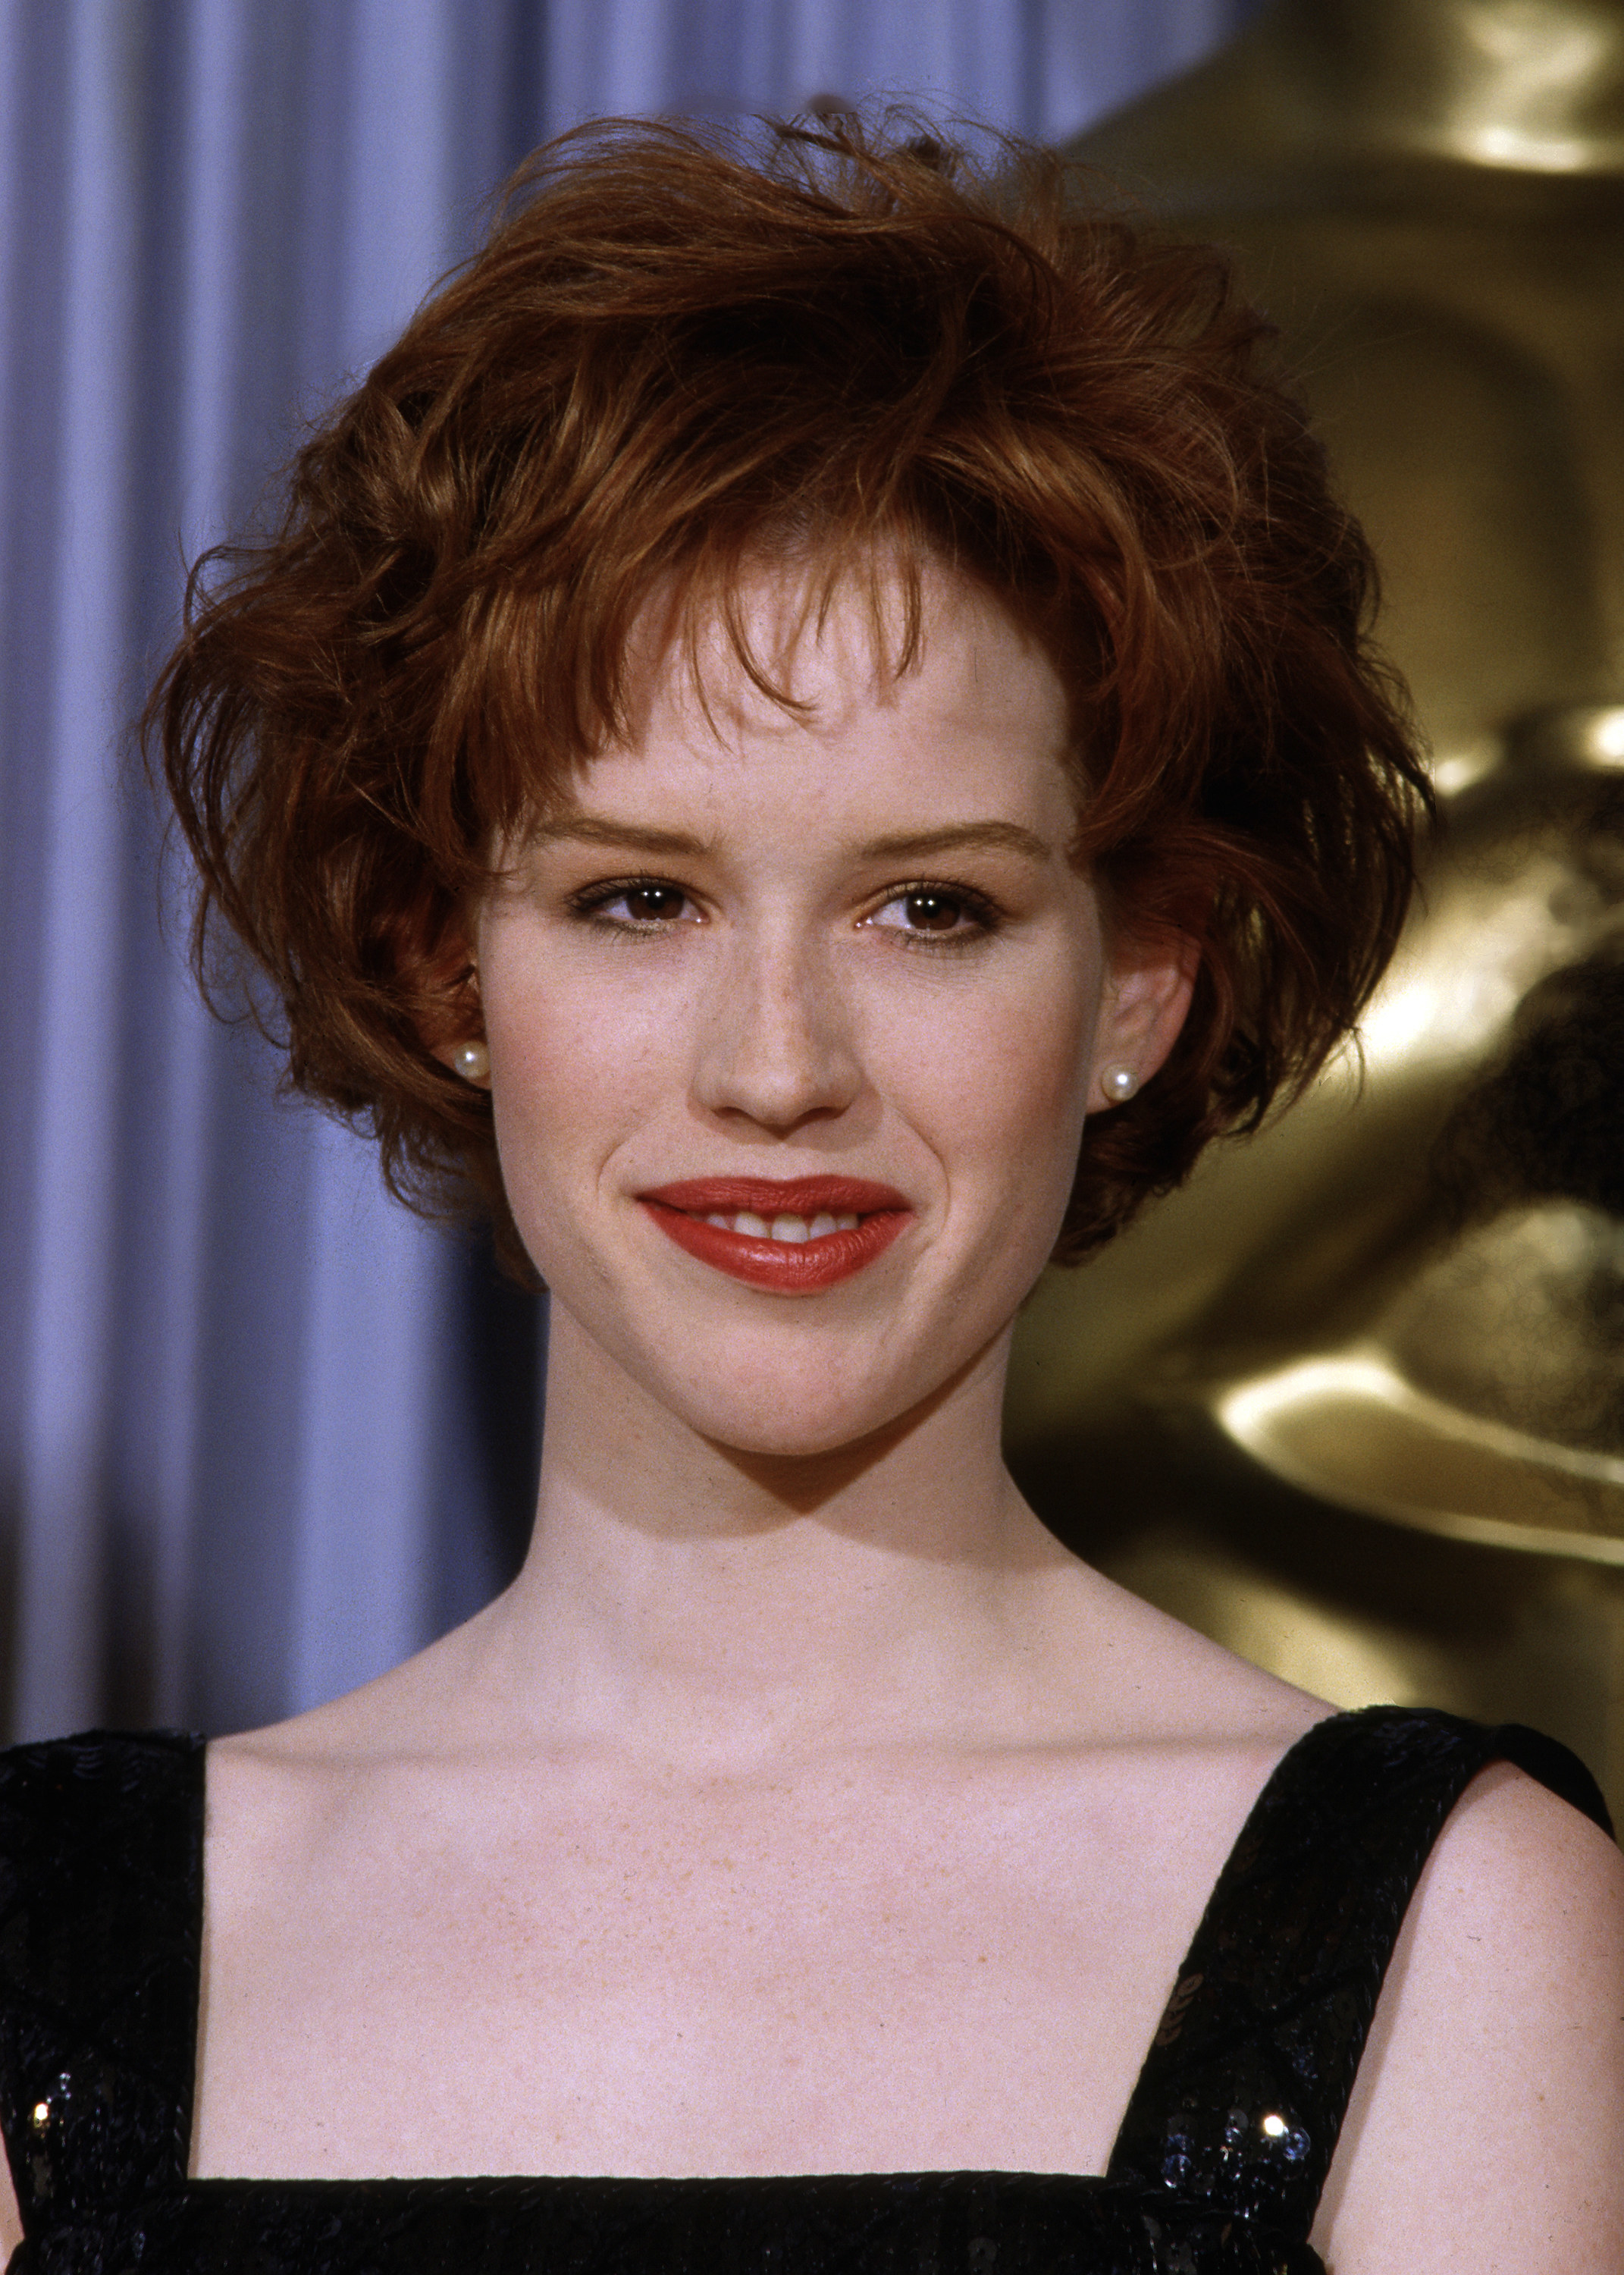 Molly Ringwald is pictured while attending the 1987 Academy Awards